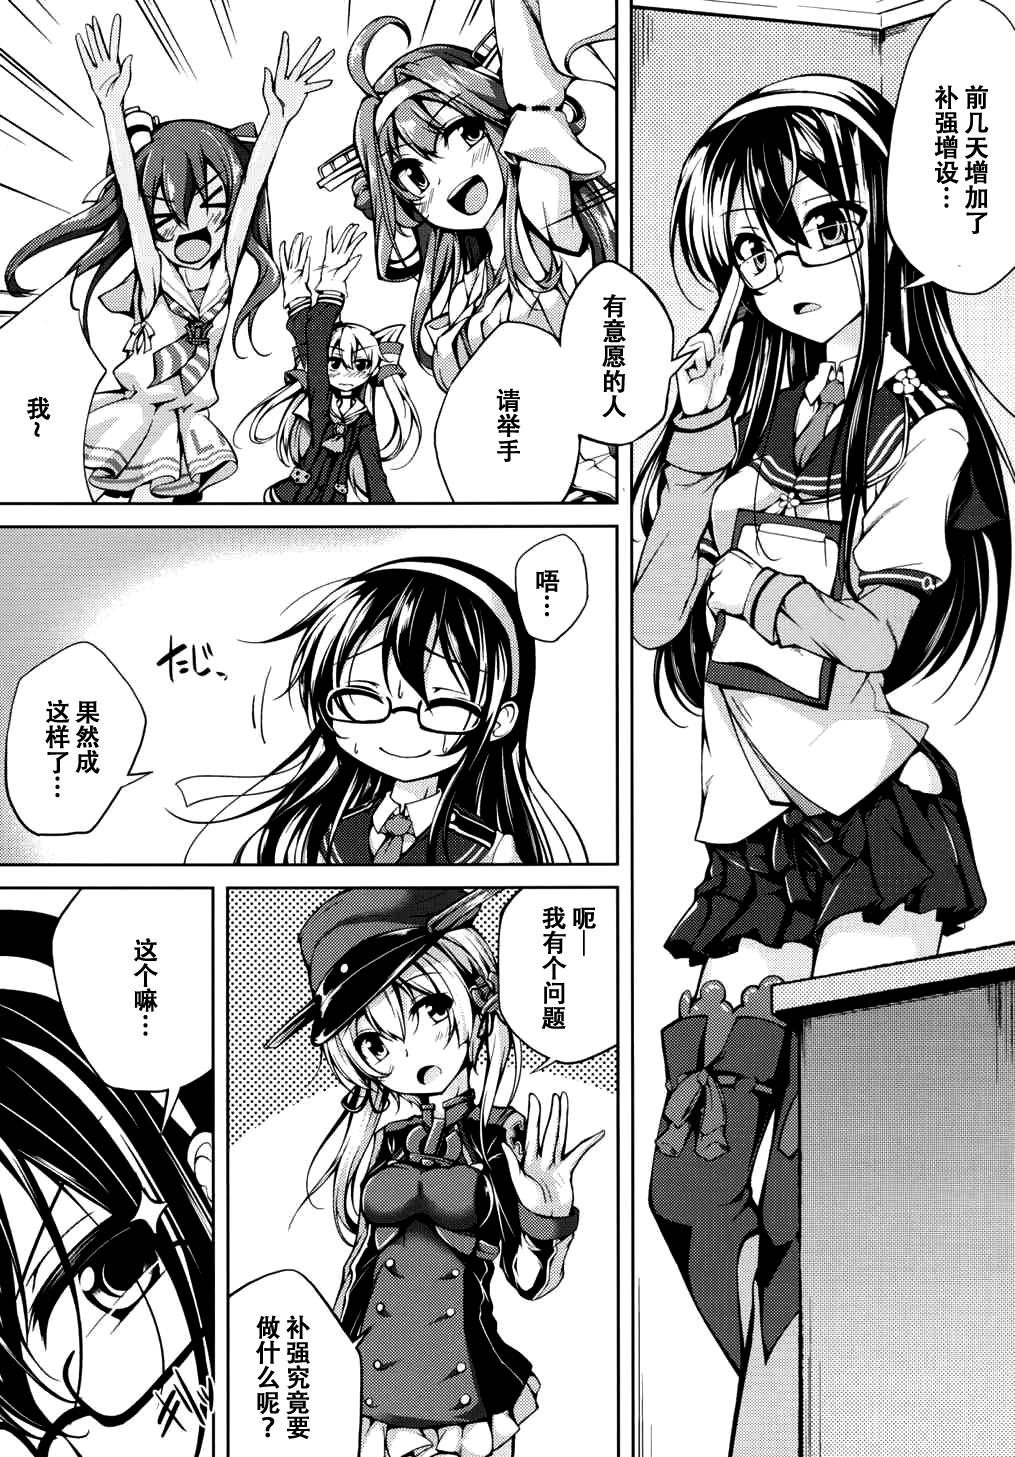 Role Play Koiiro Moyou 14 - Kantai collection Hotwife - Page 3